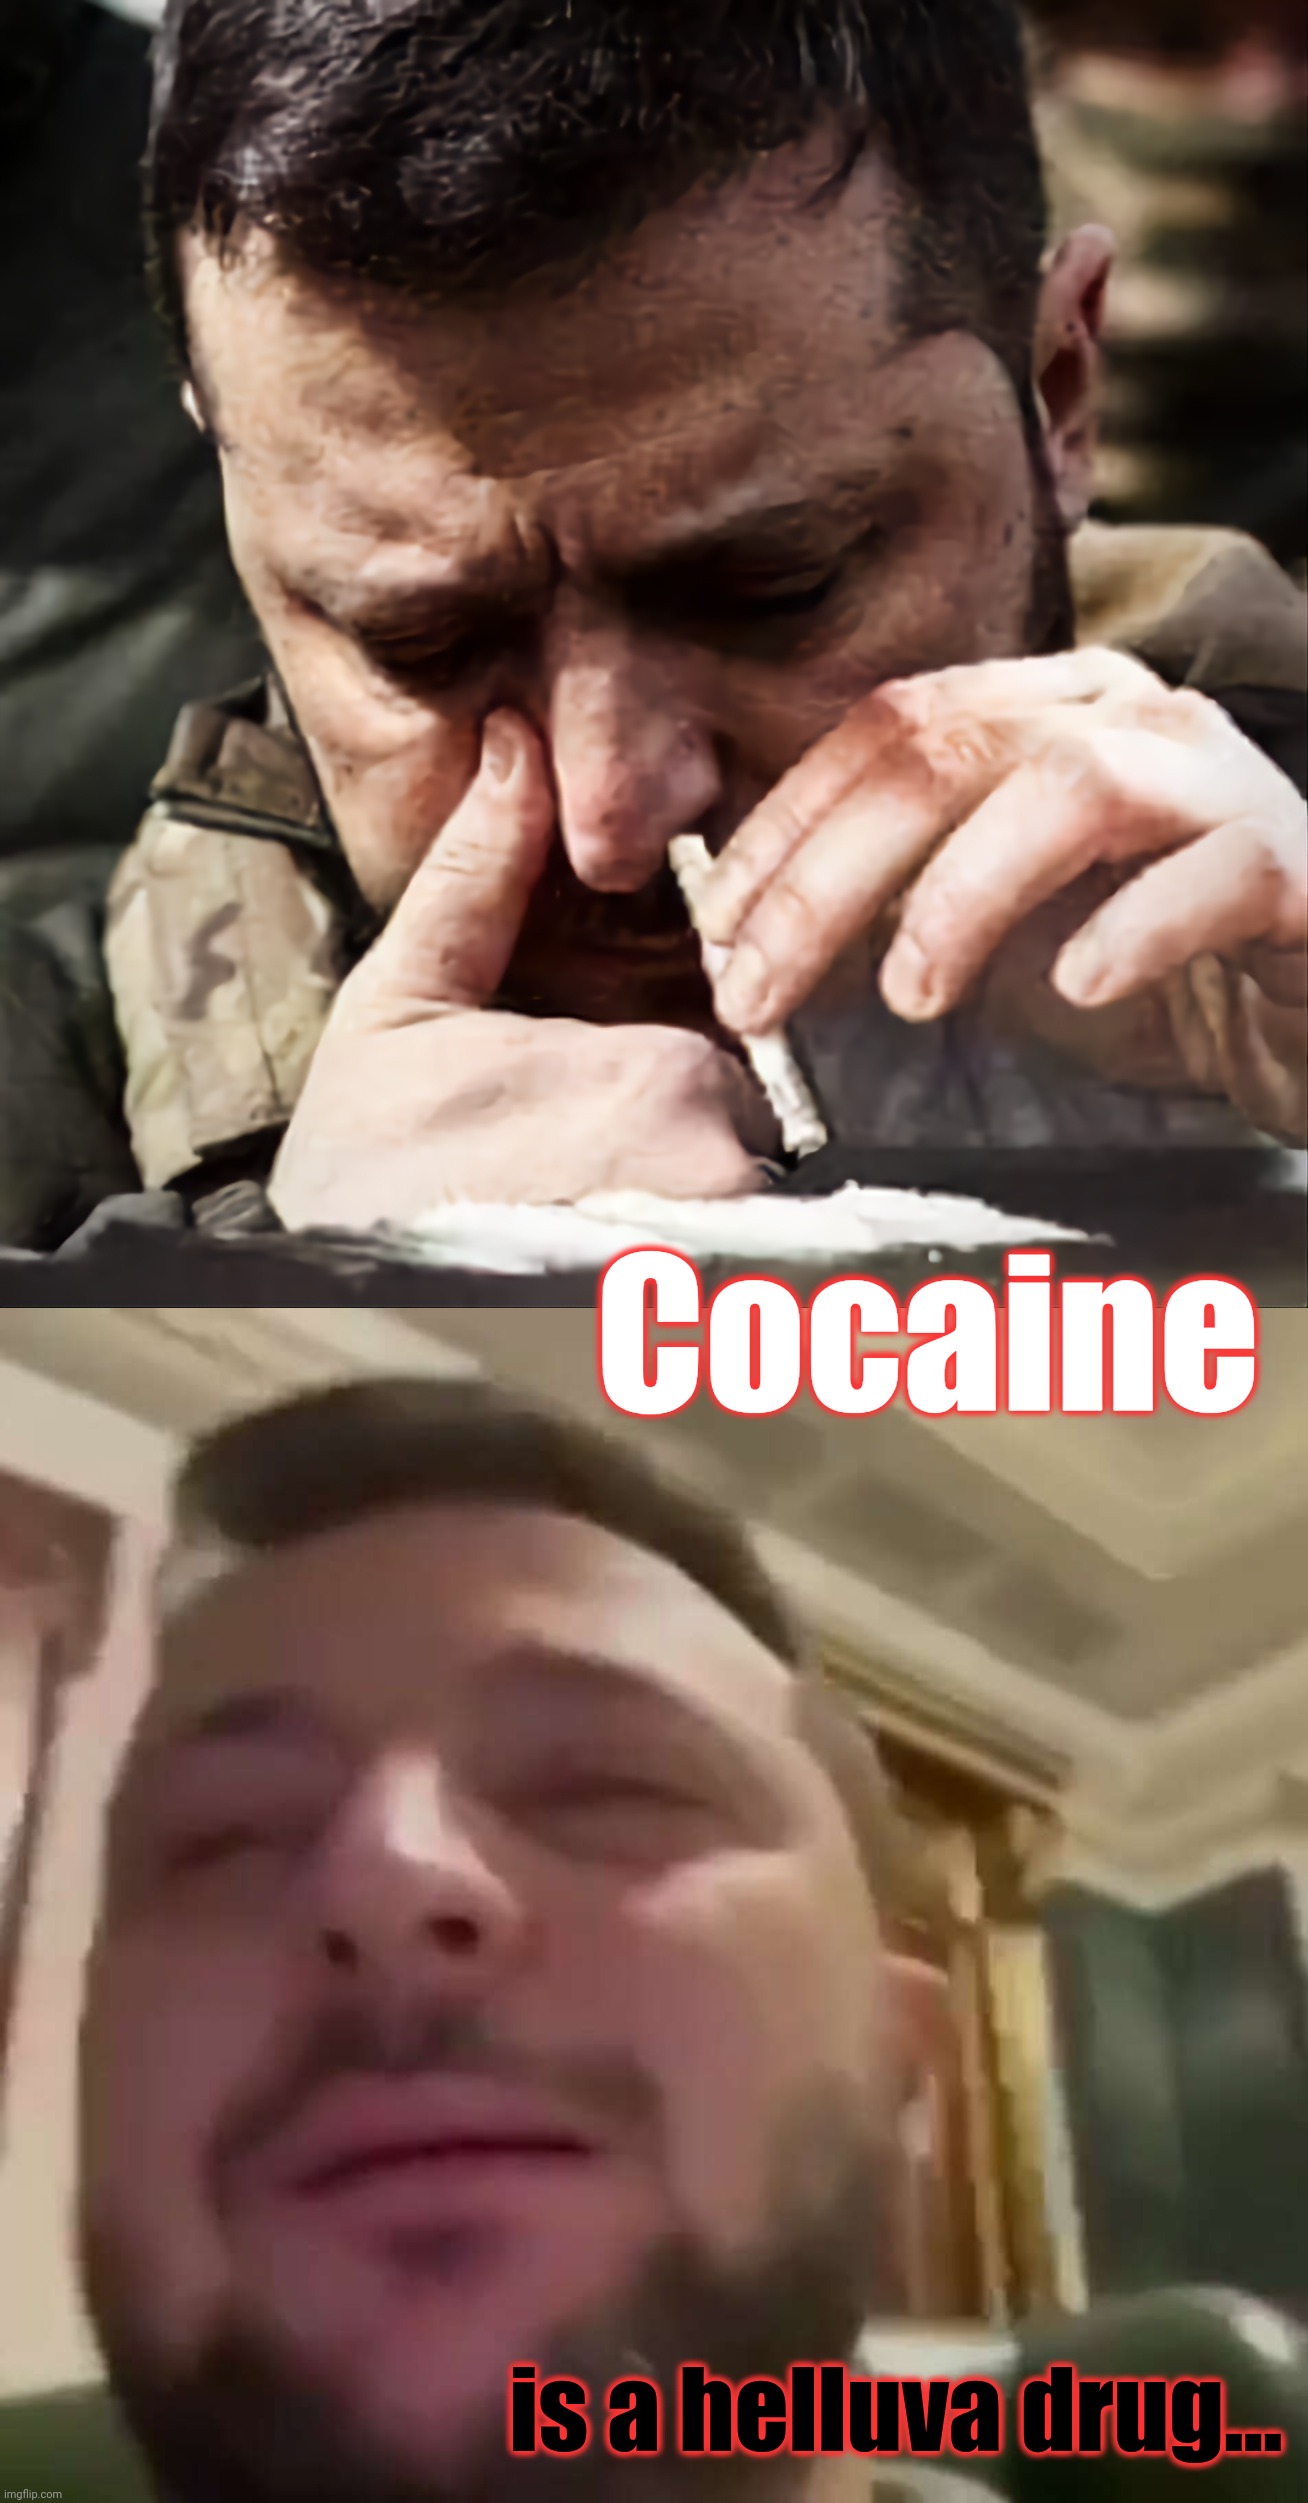 Cocaine is a helluva drug... | made w/ Imgflip meme maker